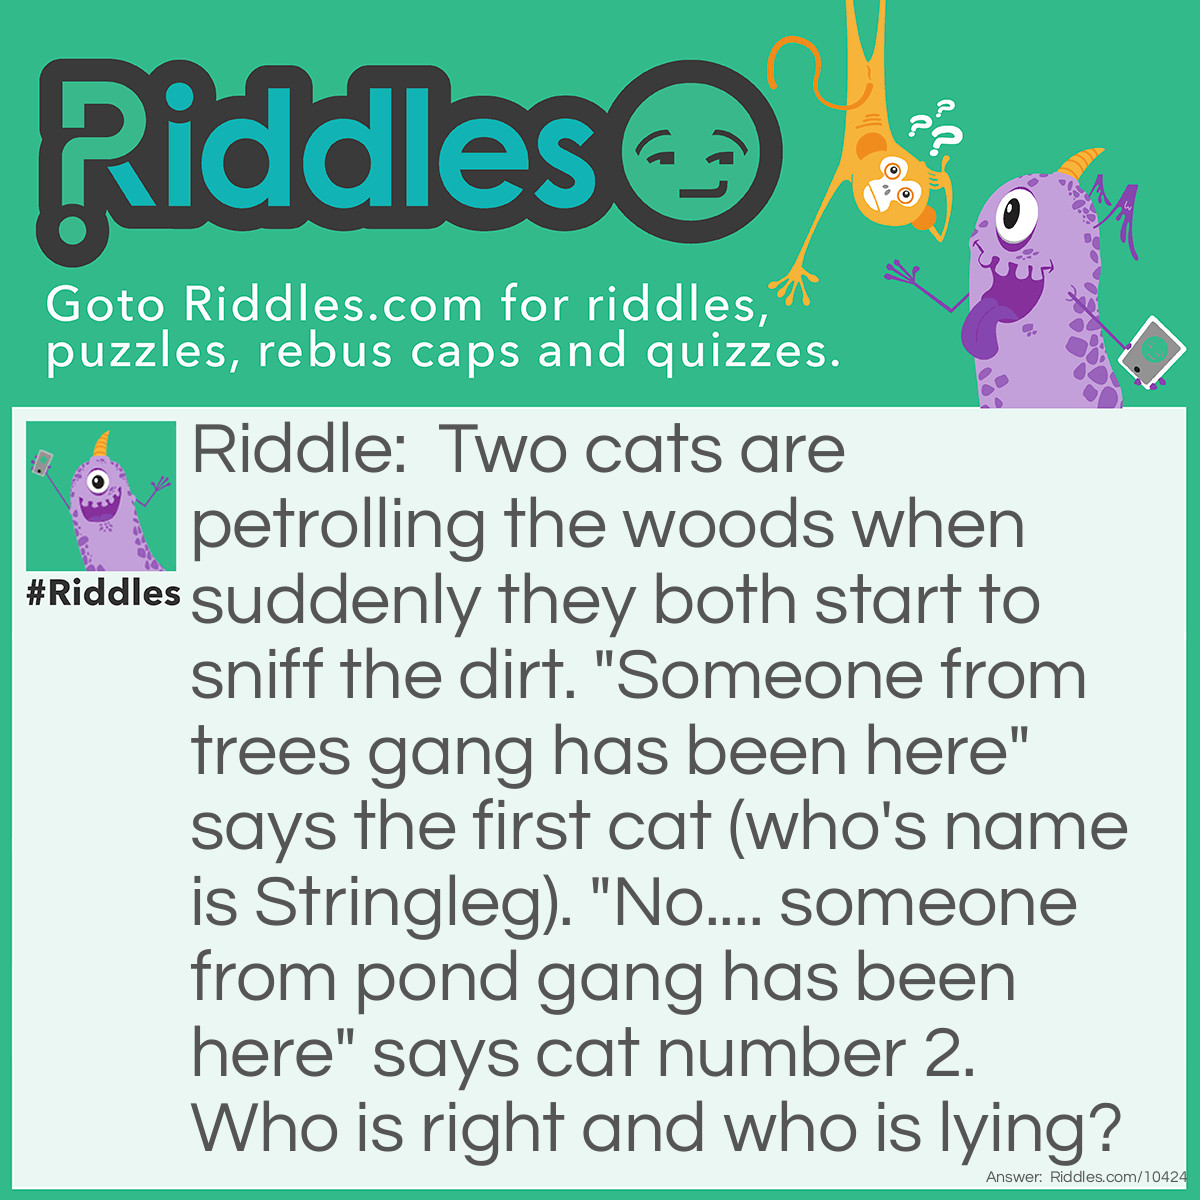 Riddle: Two cats are petrolling the woods when suddenly they both start to sniff the dirt. "Someone from trees gang has been here" says the first cat (who's name is Stringleg). "No.... someone from pond gang has been here" says cat number 2. Who is right and who is lying? Answer: They are both right! Stringleg is a clever green eye-tabby from pond gang and her other cat is from trees gang, but they don't know that they are from different gangs. They can't sniff themselves so they don't know what the gangs that they are smell like... but they can sniff each other but they don't think they can sniff each other because they think they come from the same gang! So they both think the dirt is a different cat from another gang to the gang that they are.